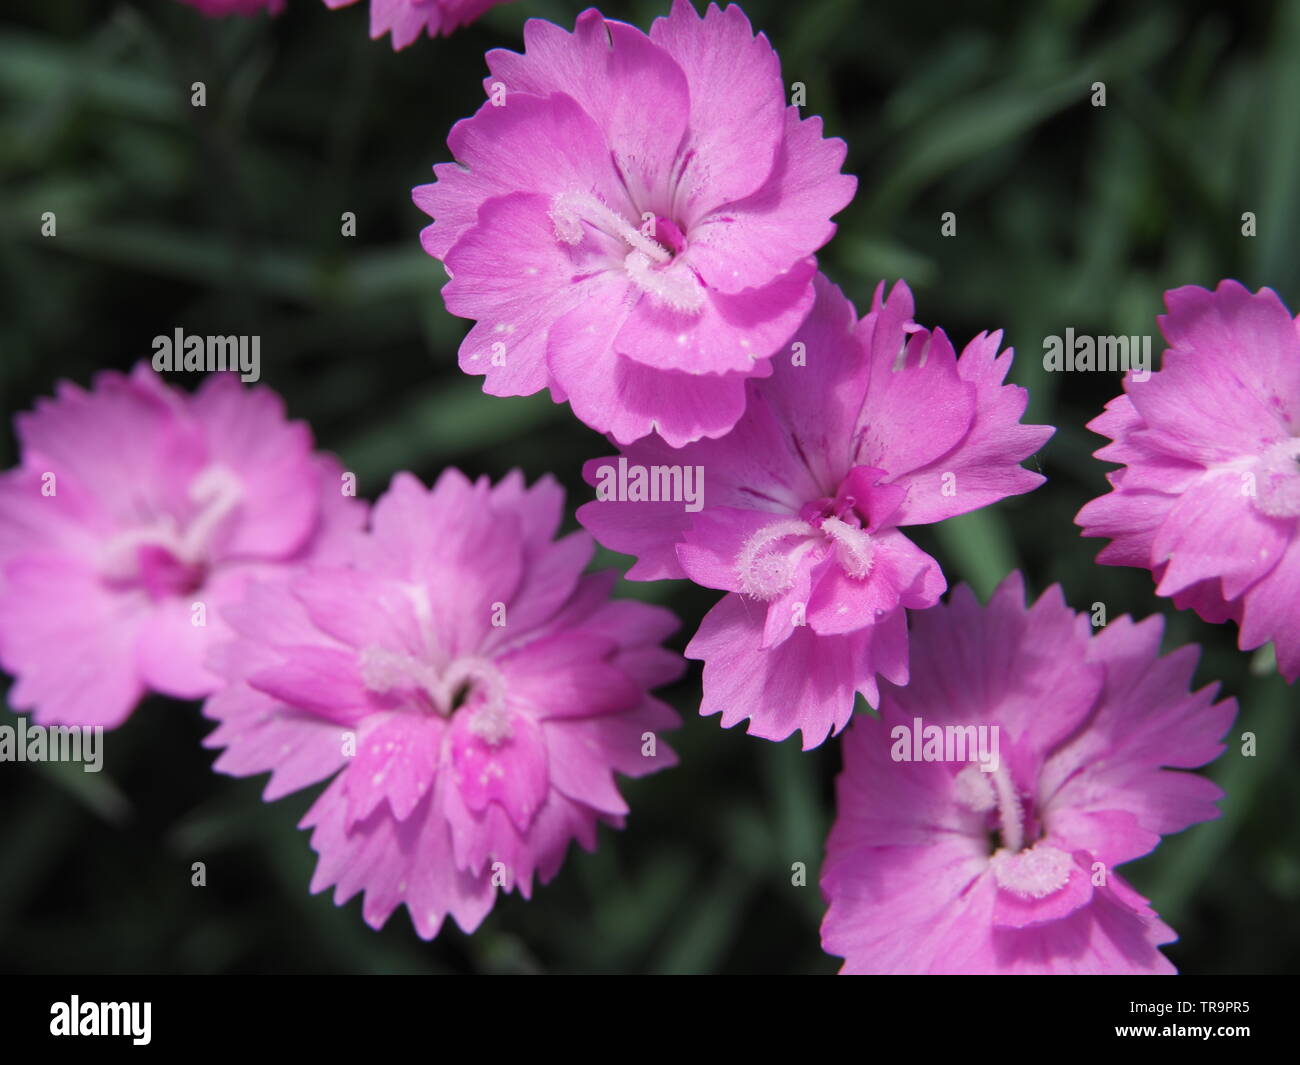 pink carnation flower close up Stock Photo